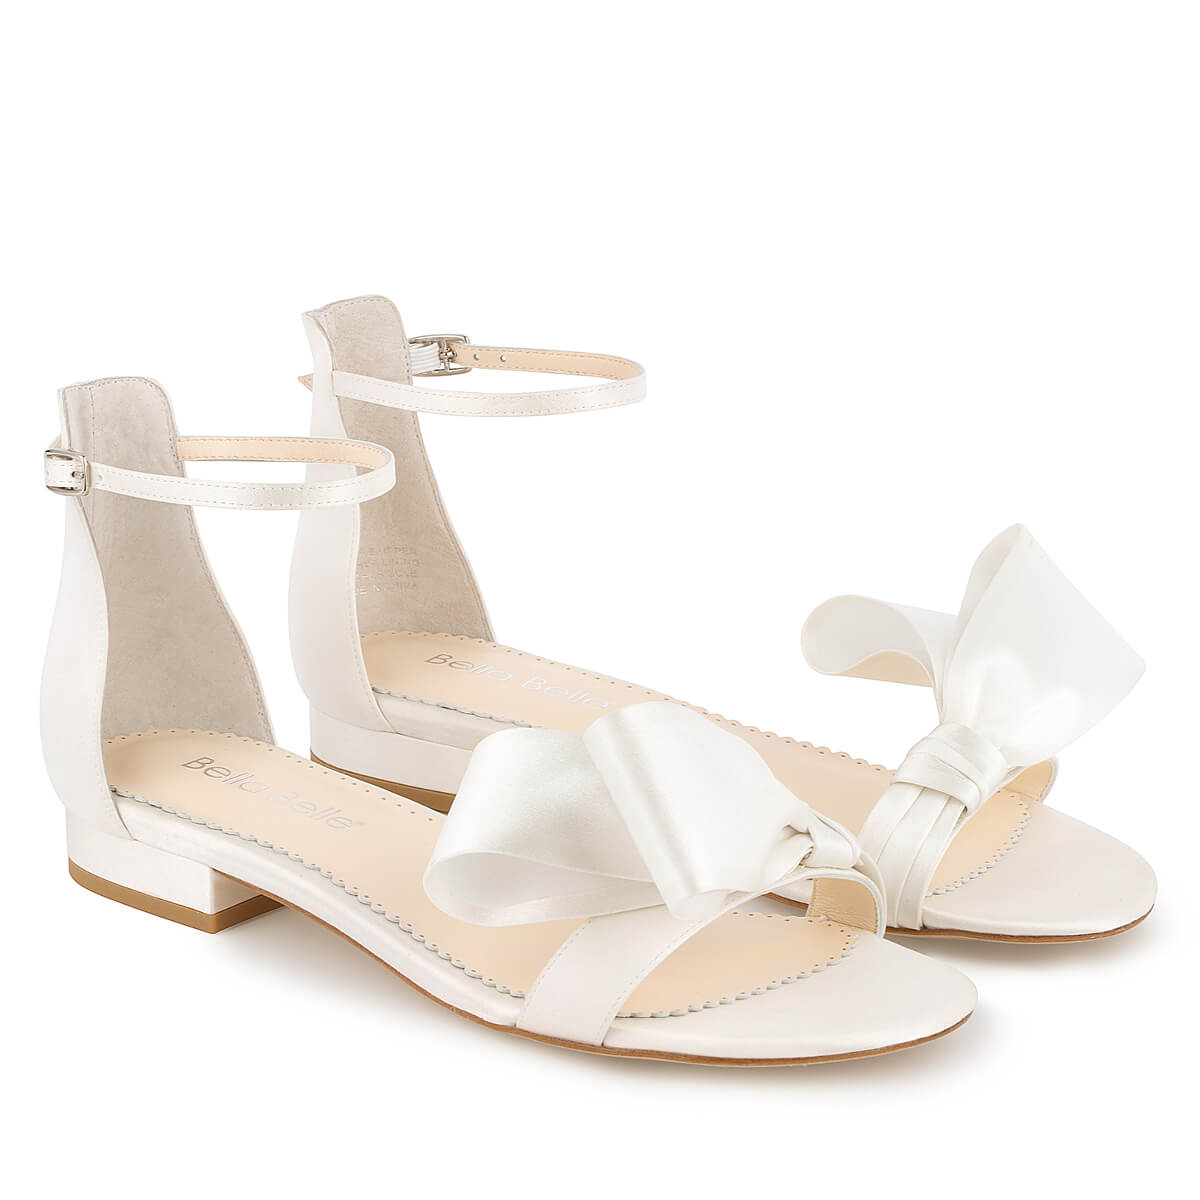 Bella Belle Shoes Zora Open Toe Bridal Flats With Silk Bow